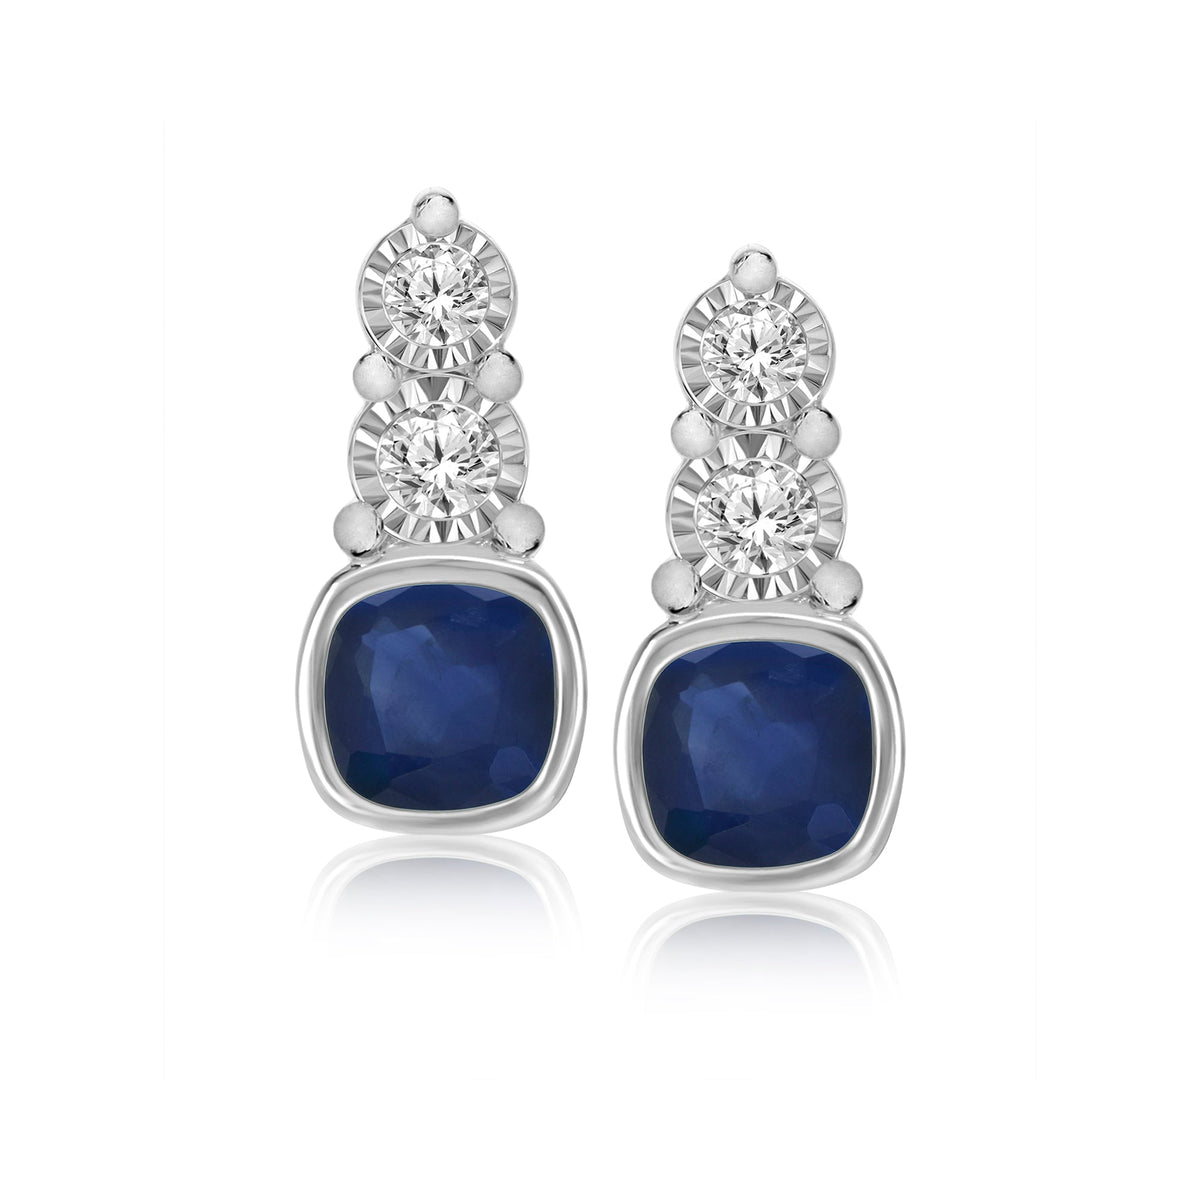 9ct white gold 4mm cushion shape sapphire &amp; miracle plate diamond studs earrings 0.06ct